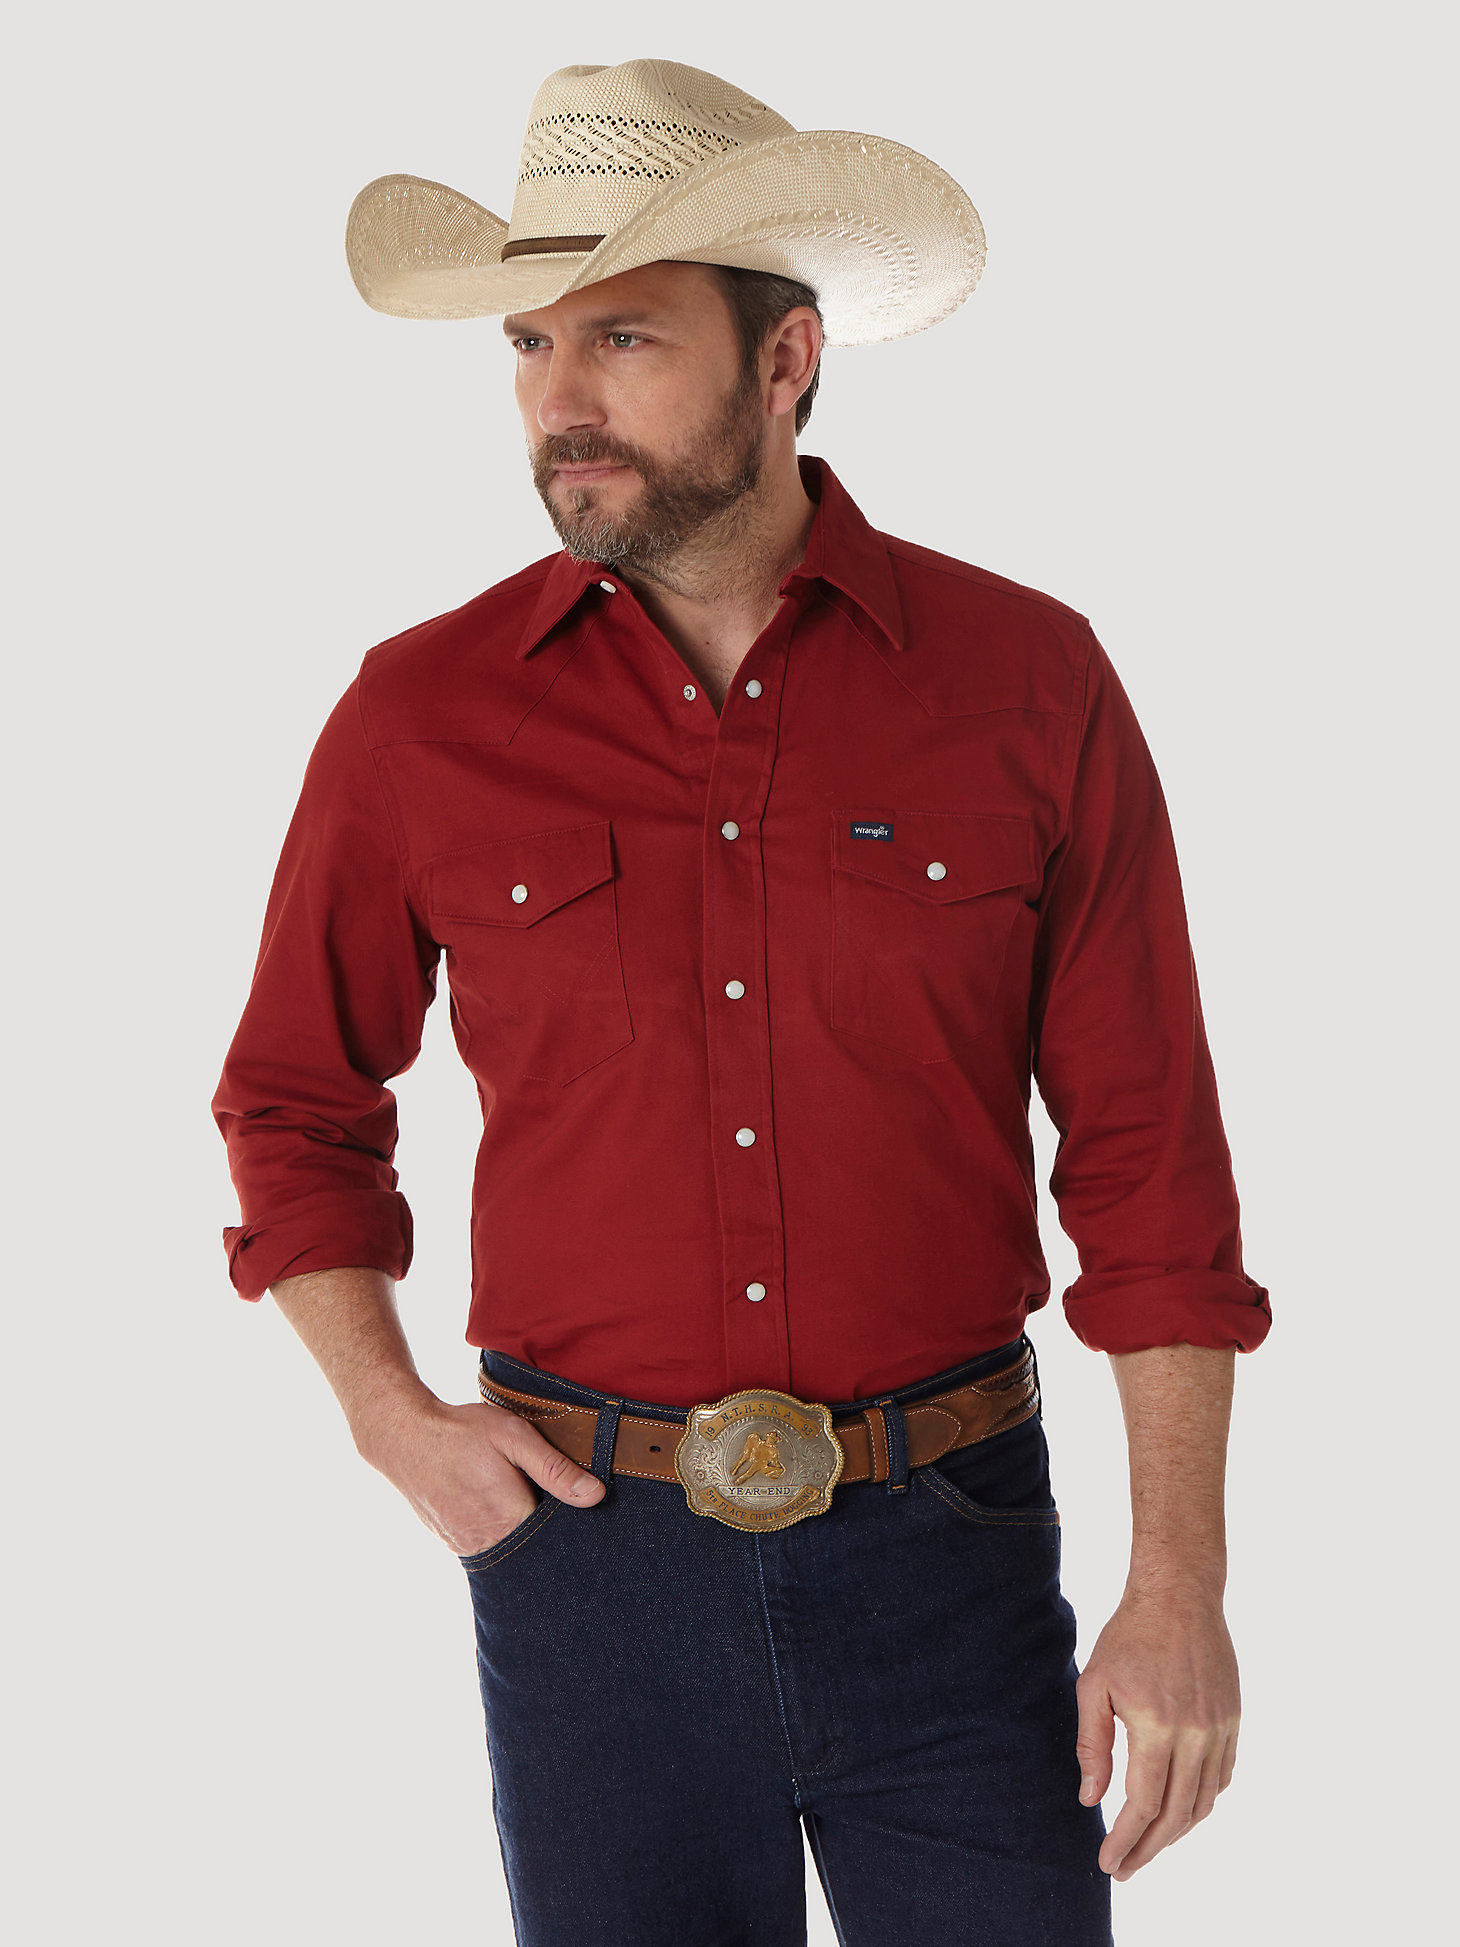 Premium Performance Advanced Comfort Cowboy Cut® Long Sleeve Spread Collar Solid Shirt in Red alternative view 3